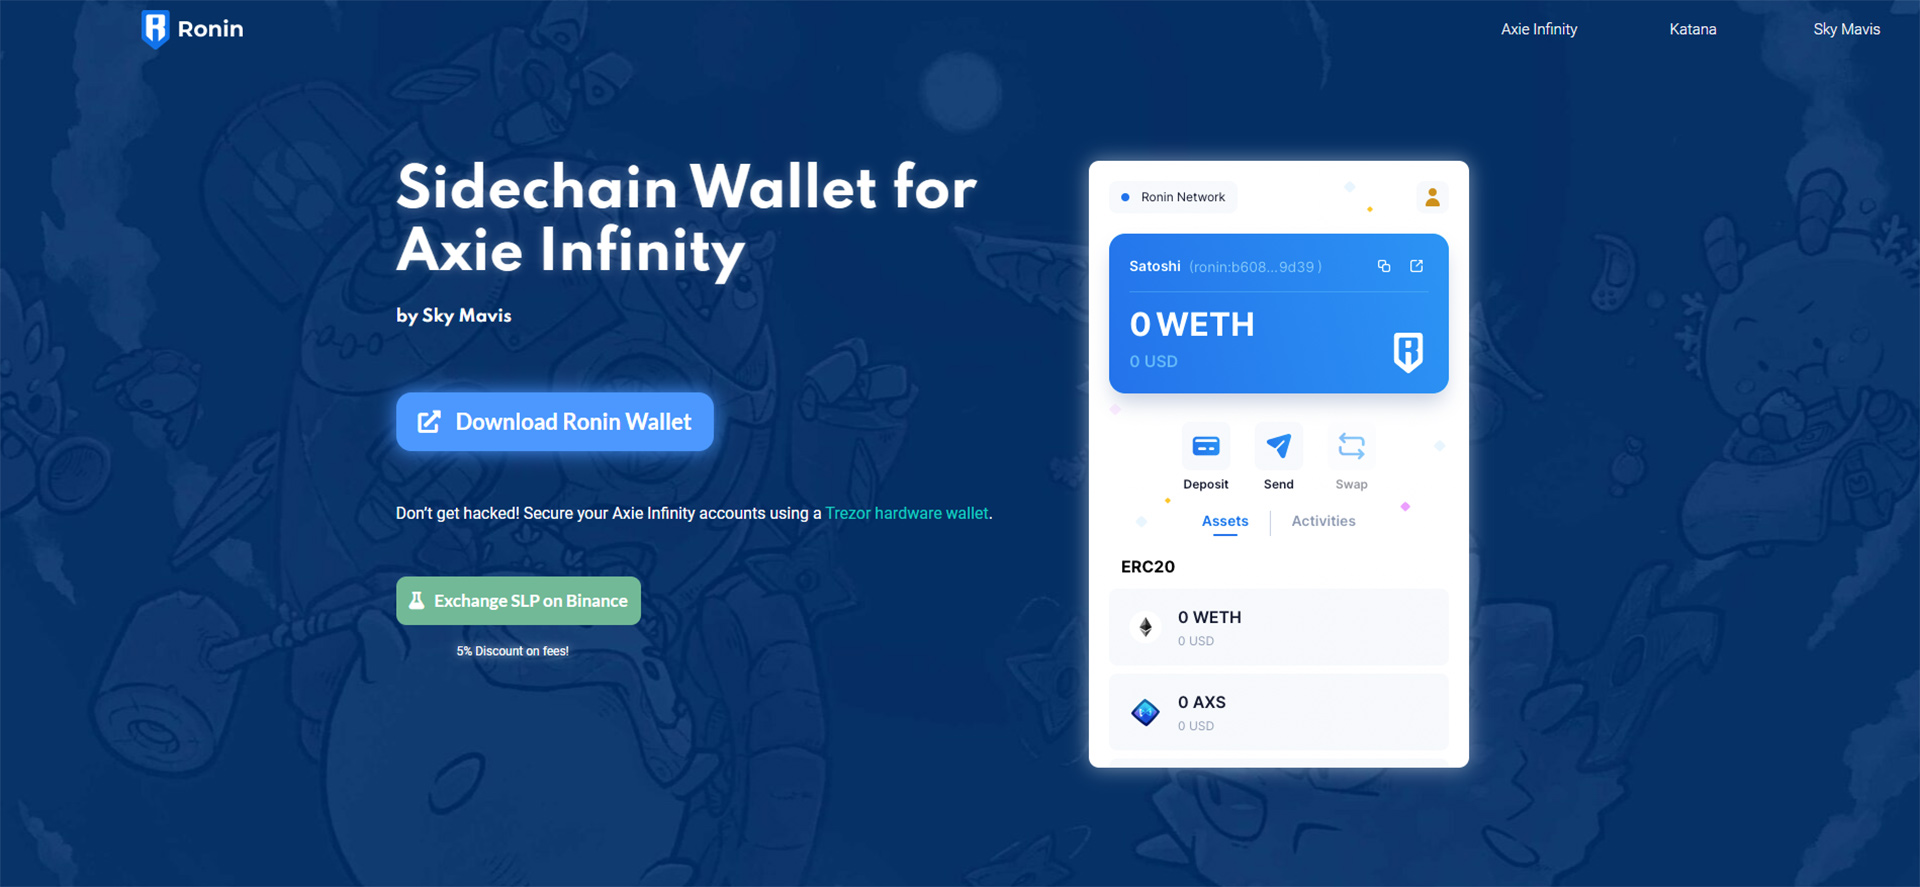 Ronin Wallet – The Axie Infinity Wallet